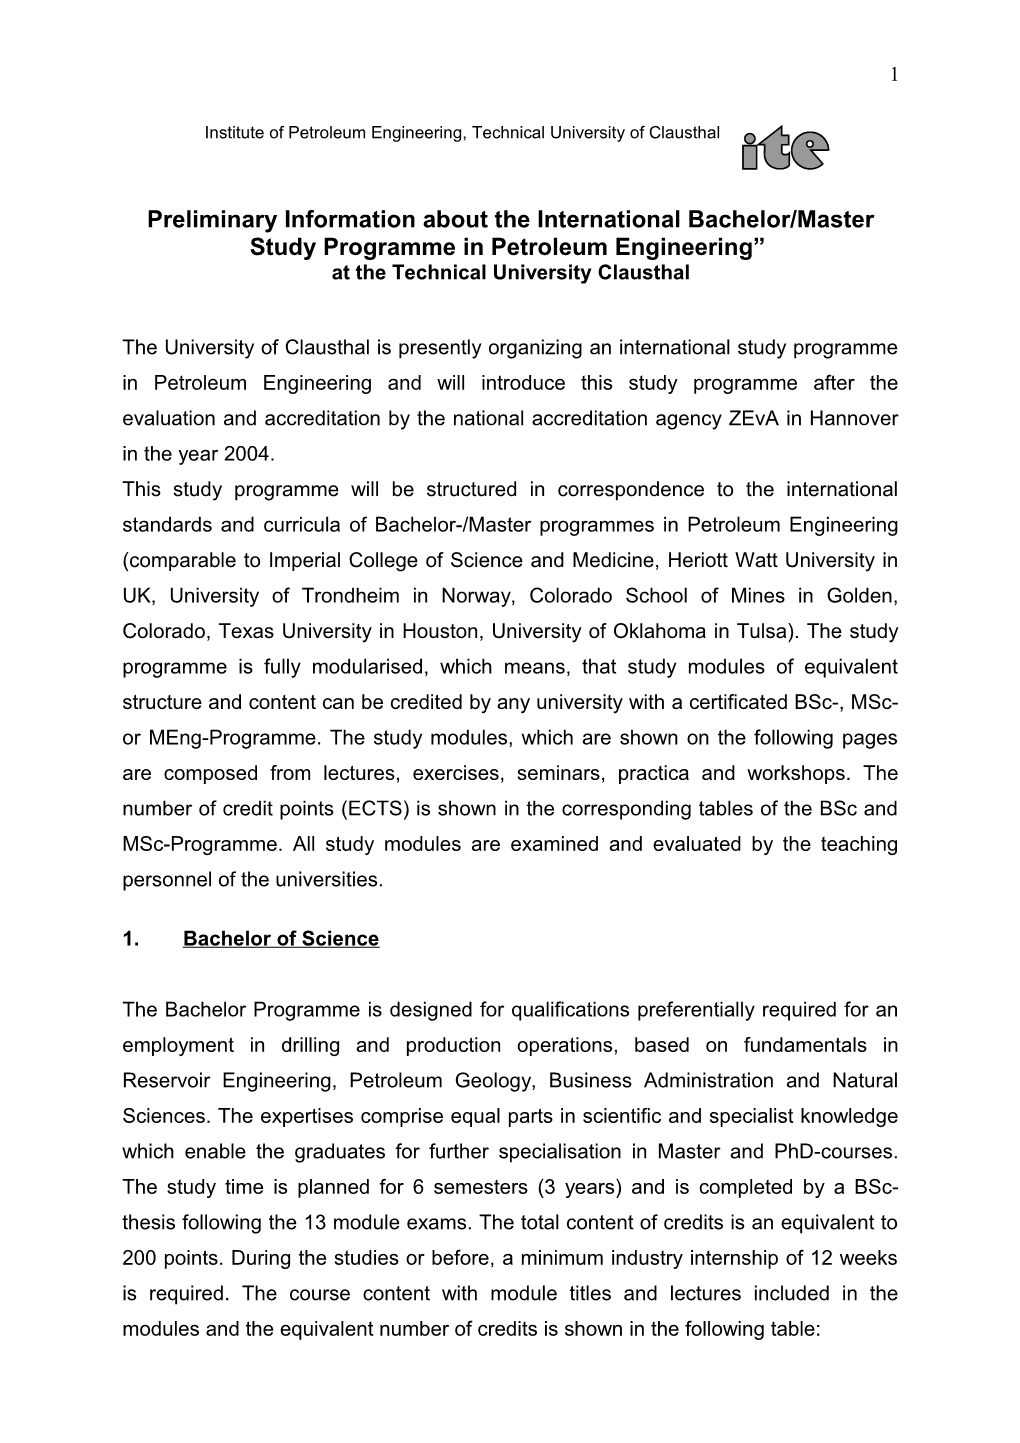 Preliminary Information About the International Bachelor/Master Study Programme in Petroleum